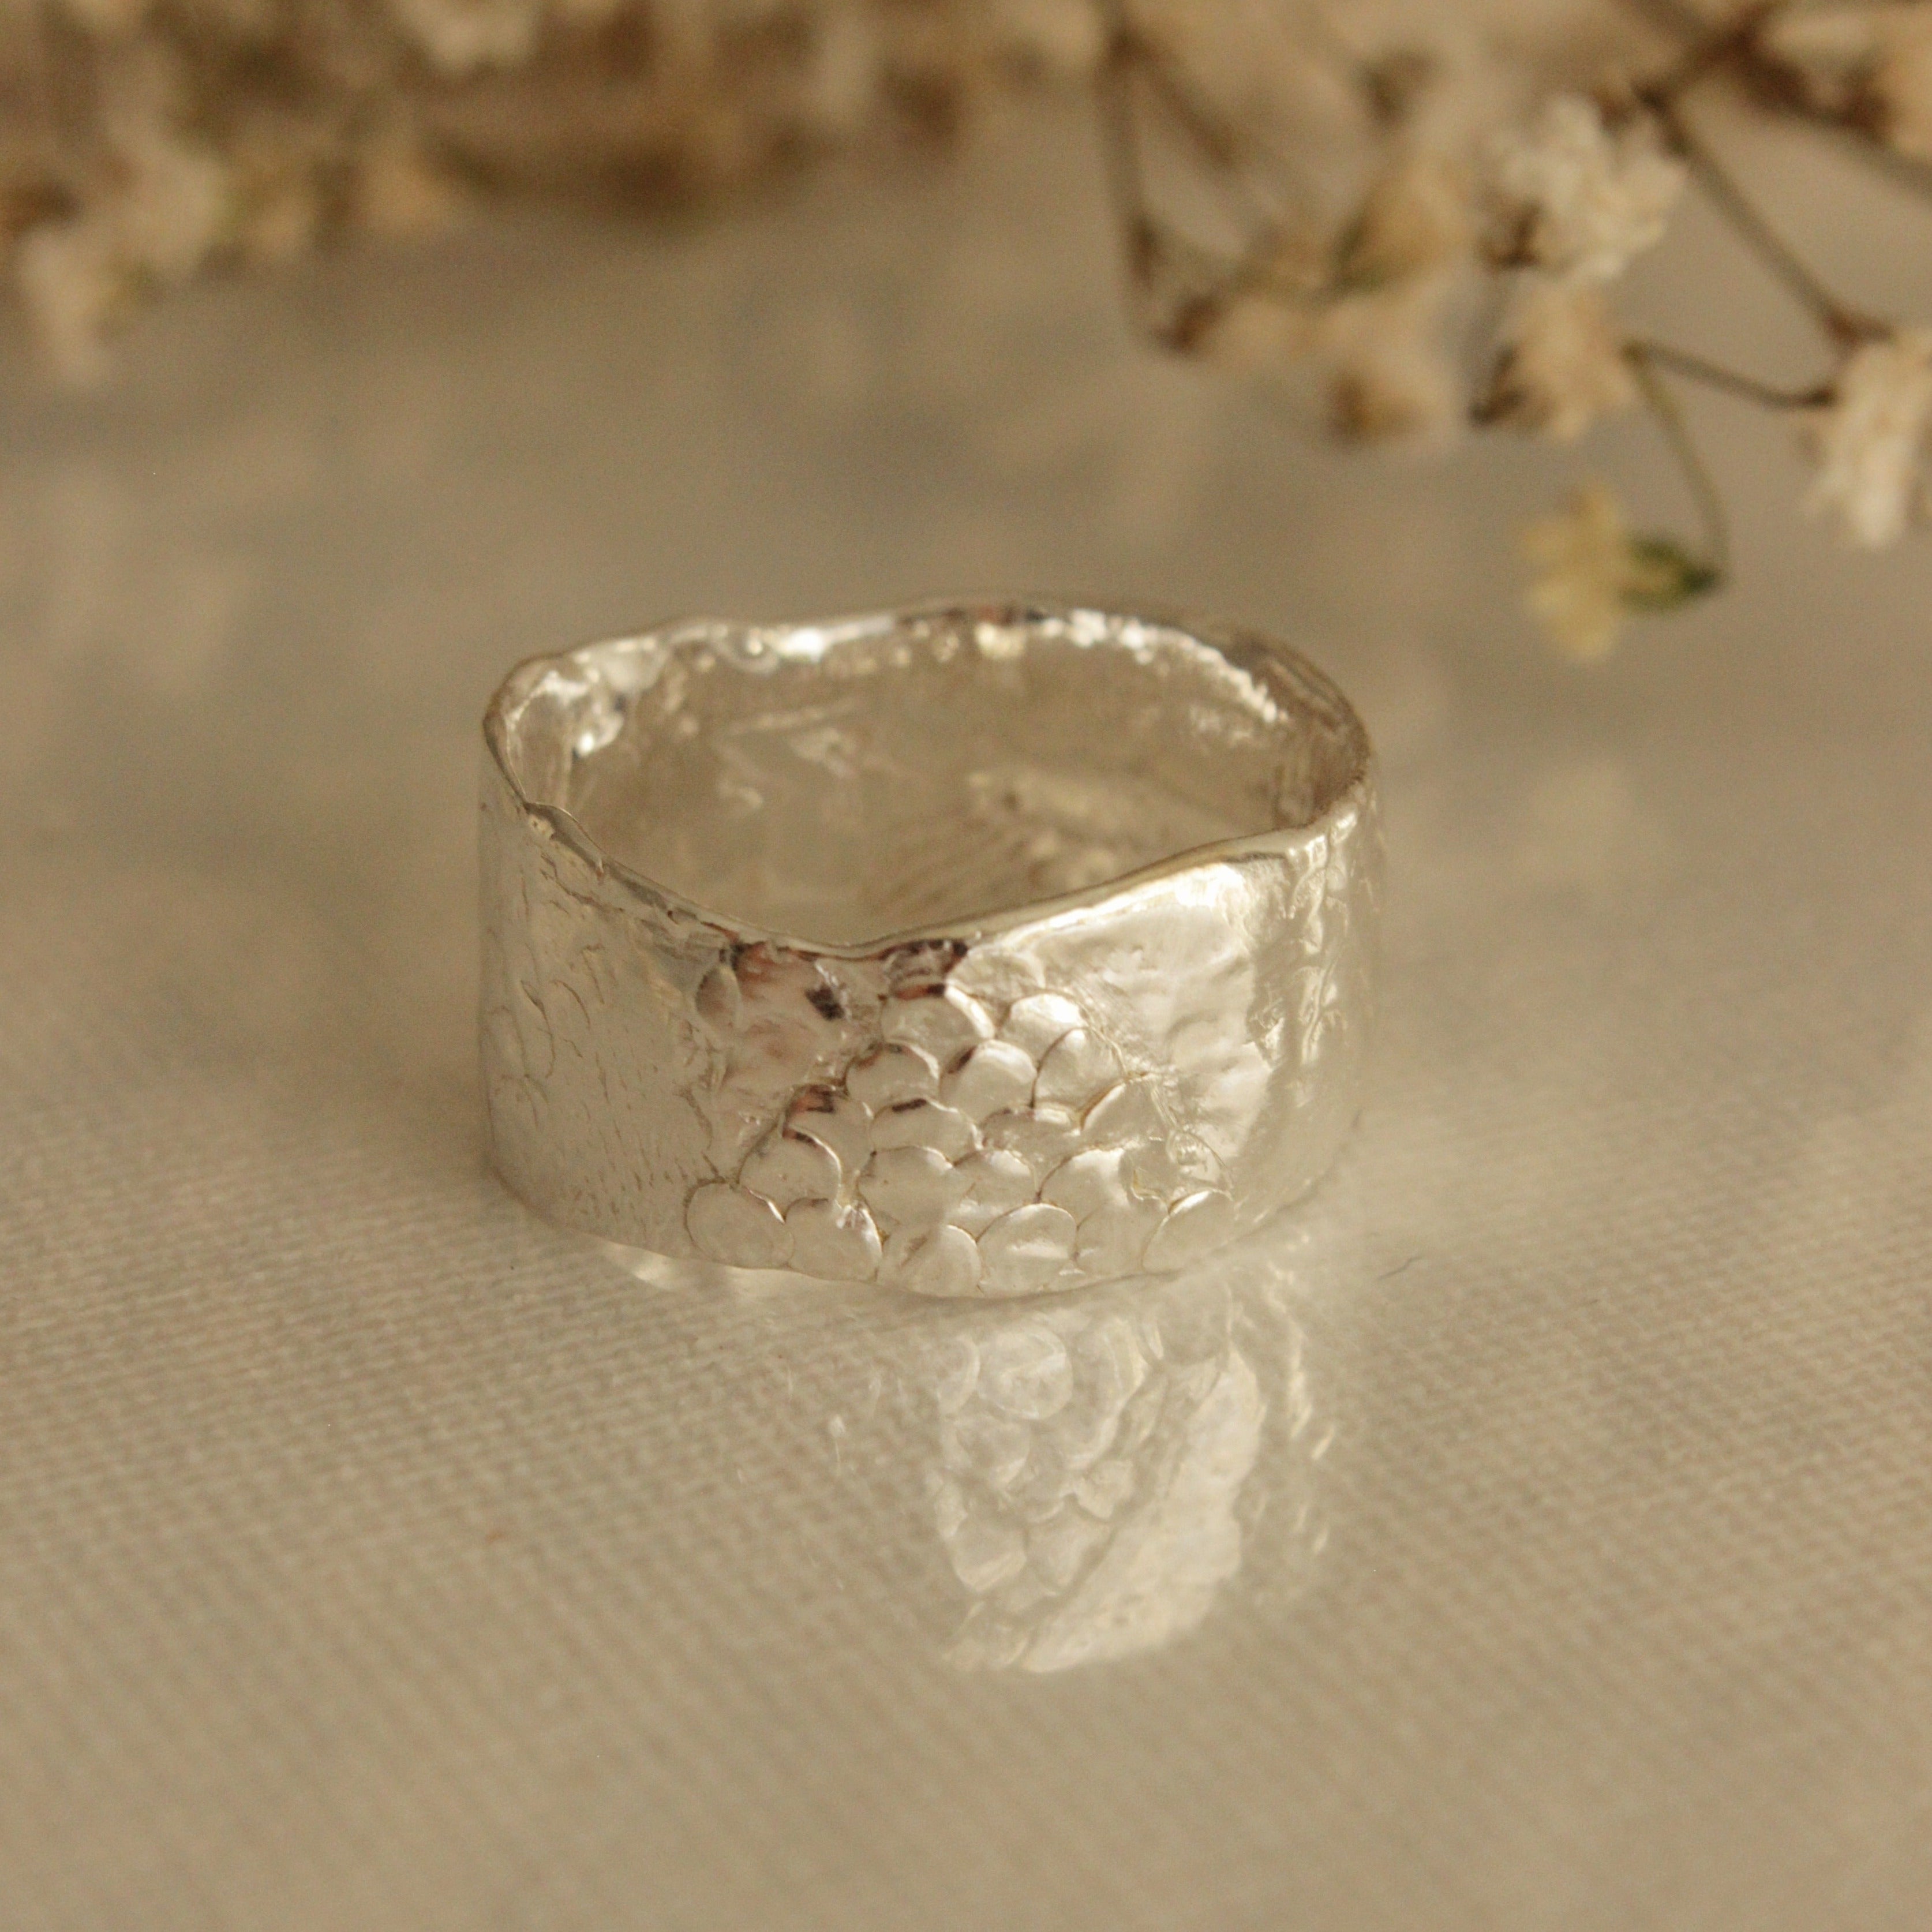 The Ancient Poet ring appears to have been plucked from the depths of the ocean. Scattered scales and hidden finger prints caress this organically formed band and offer a unique magic to this timeless piece. Enjoy this treasure everyday, along with the calming and tranquil effects it brings.